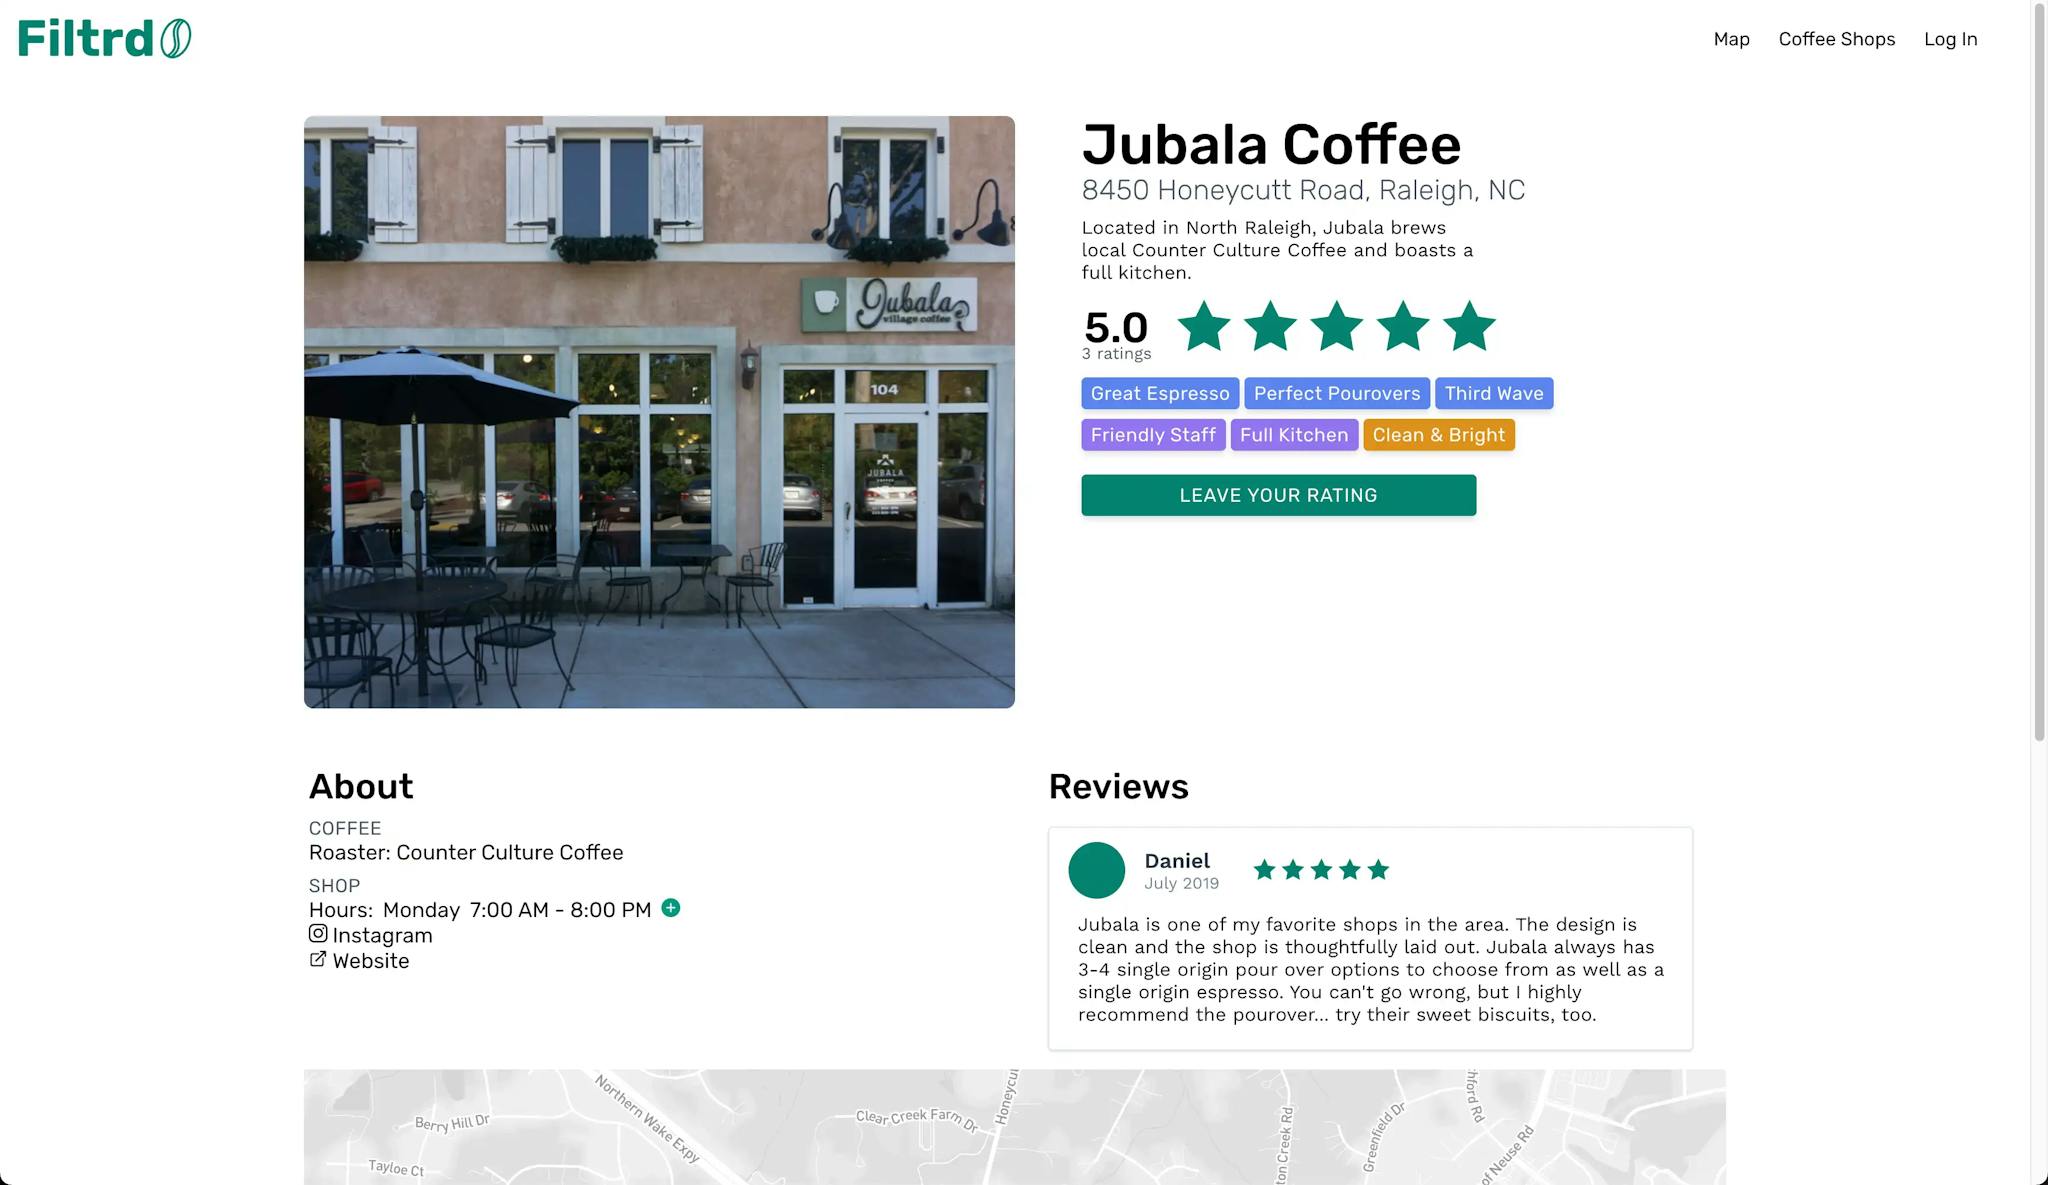 The filtrd coffee shop page